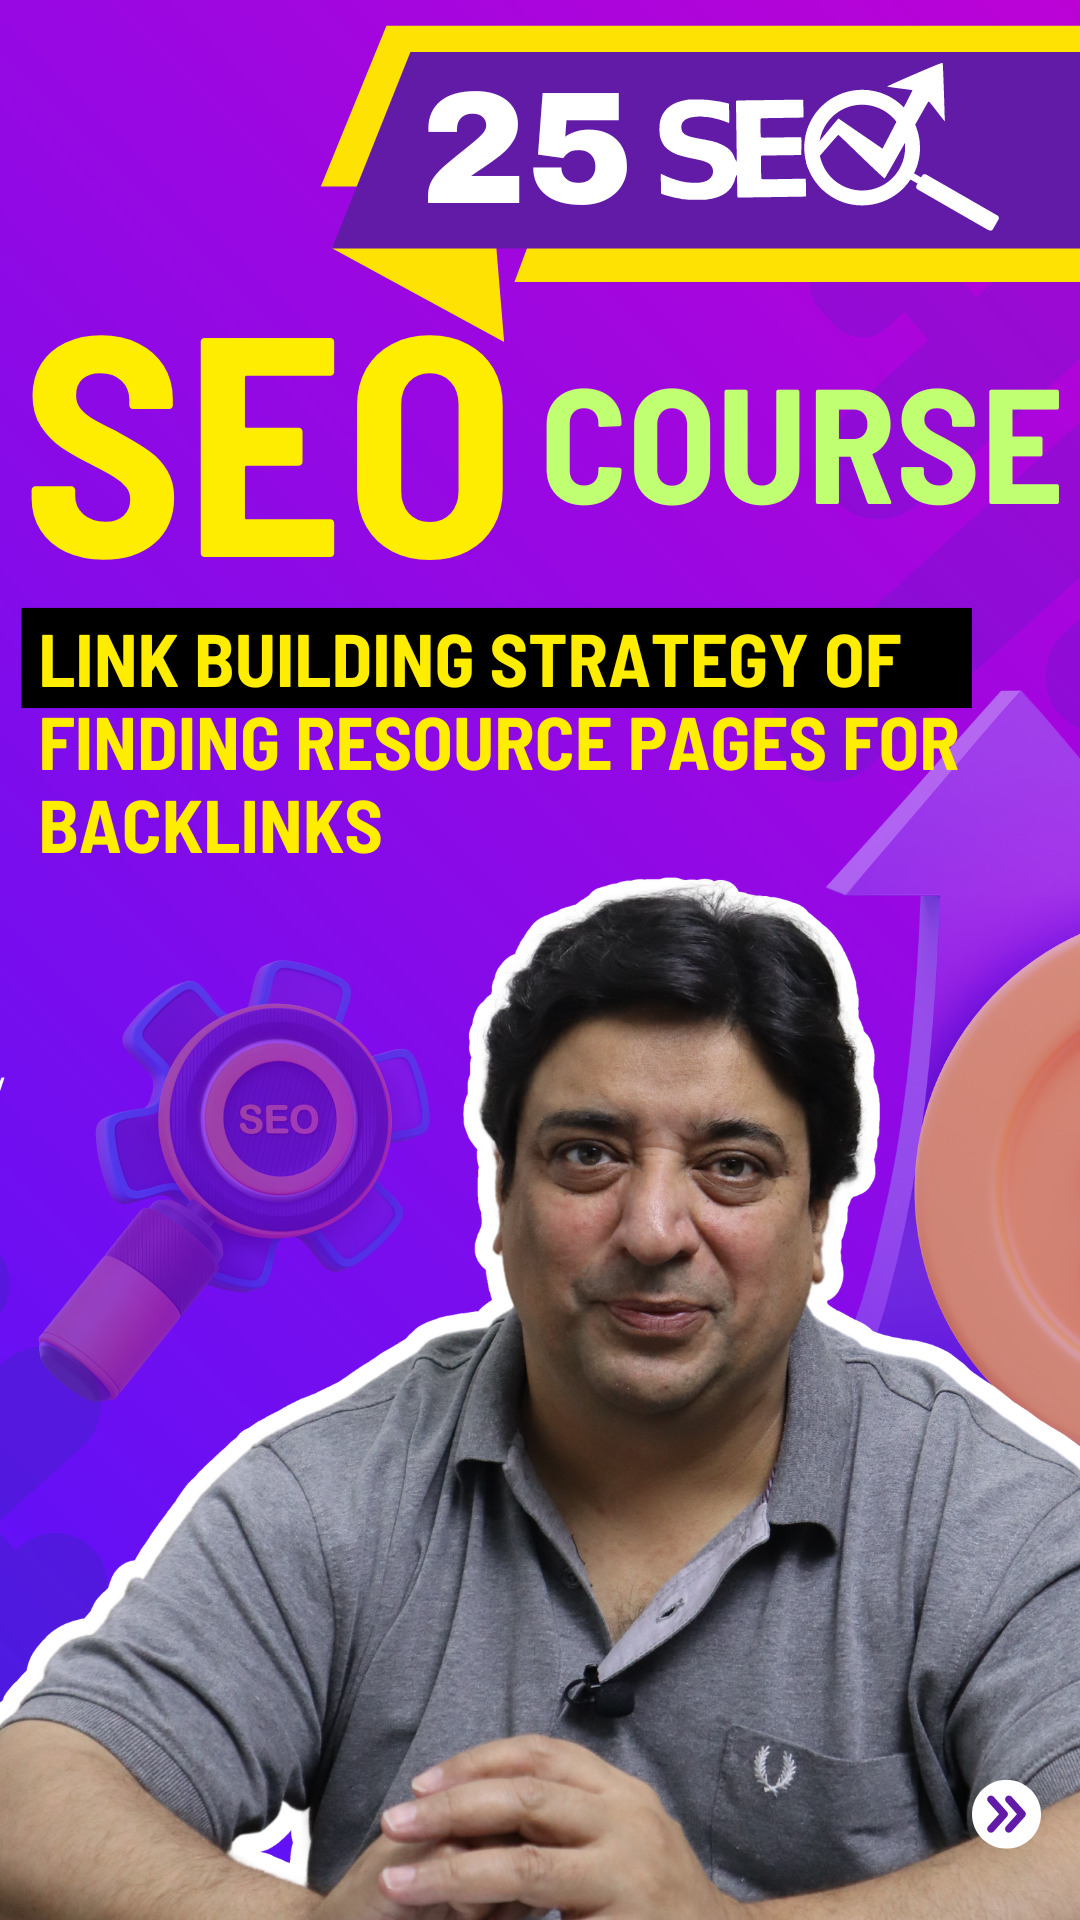 The link-building strategy of finding resource pages for backlinks